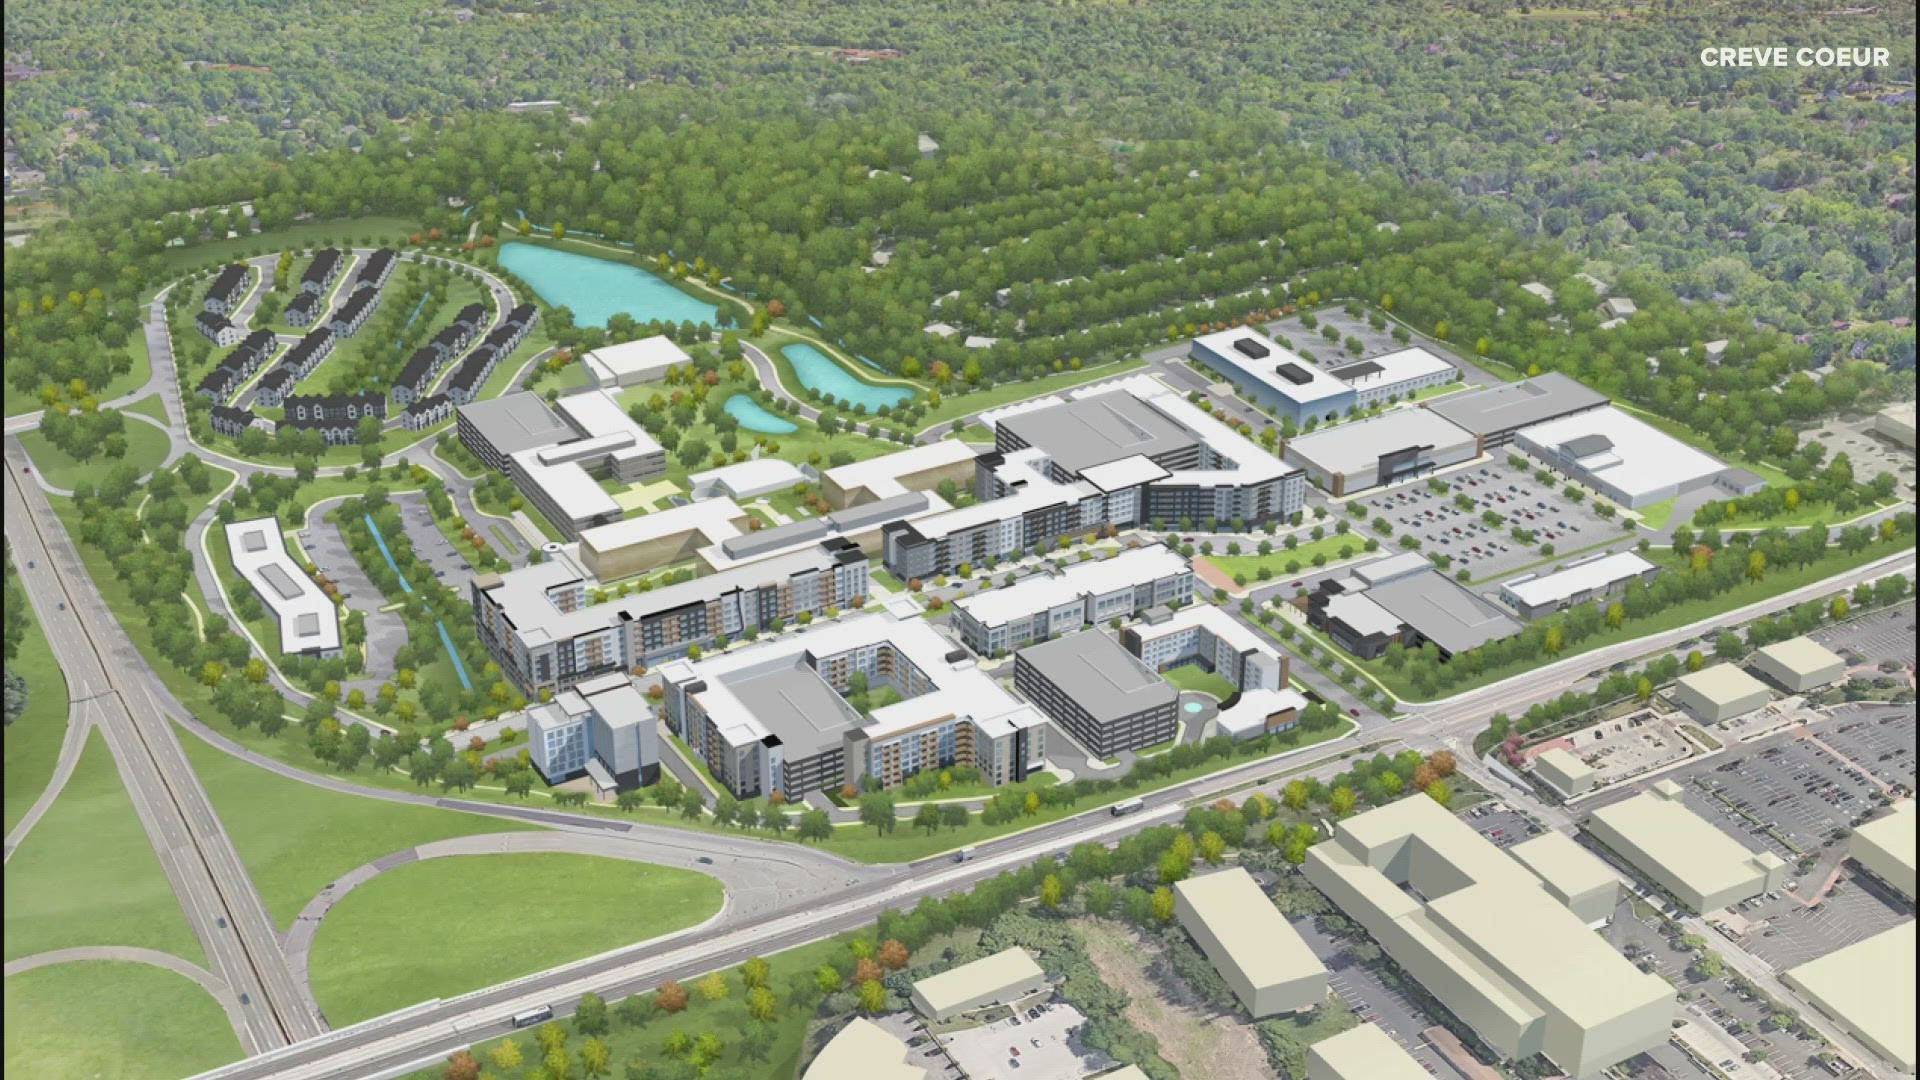 The project would turn the former Bayer campus on Olive Boulevard into a mixed use "village" with apartments, townhomes, restaurants and more.